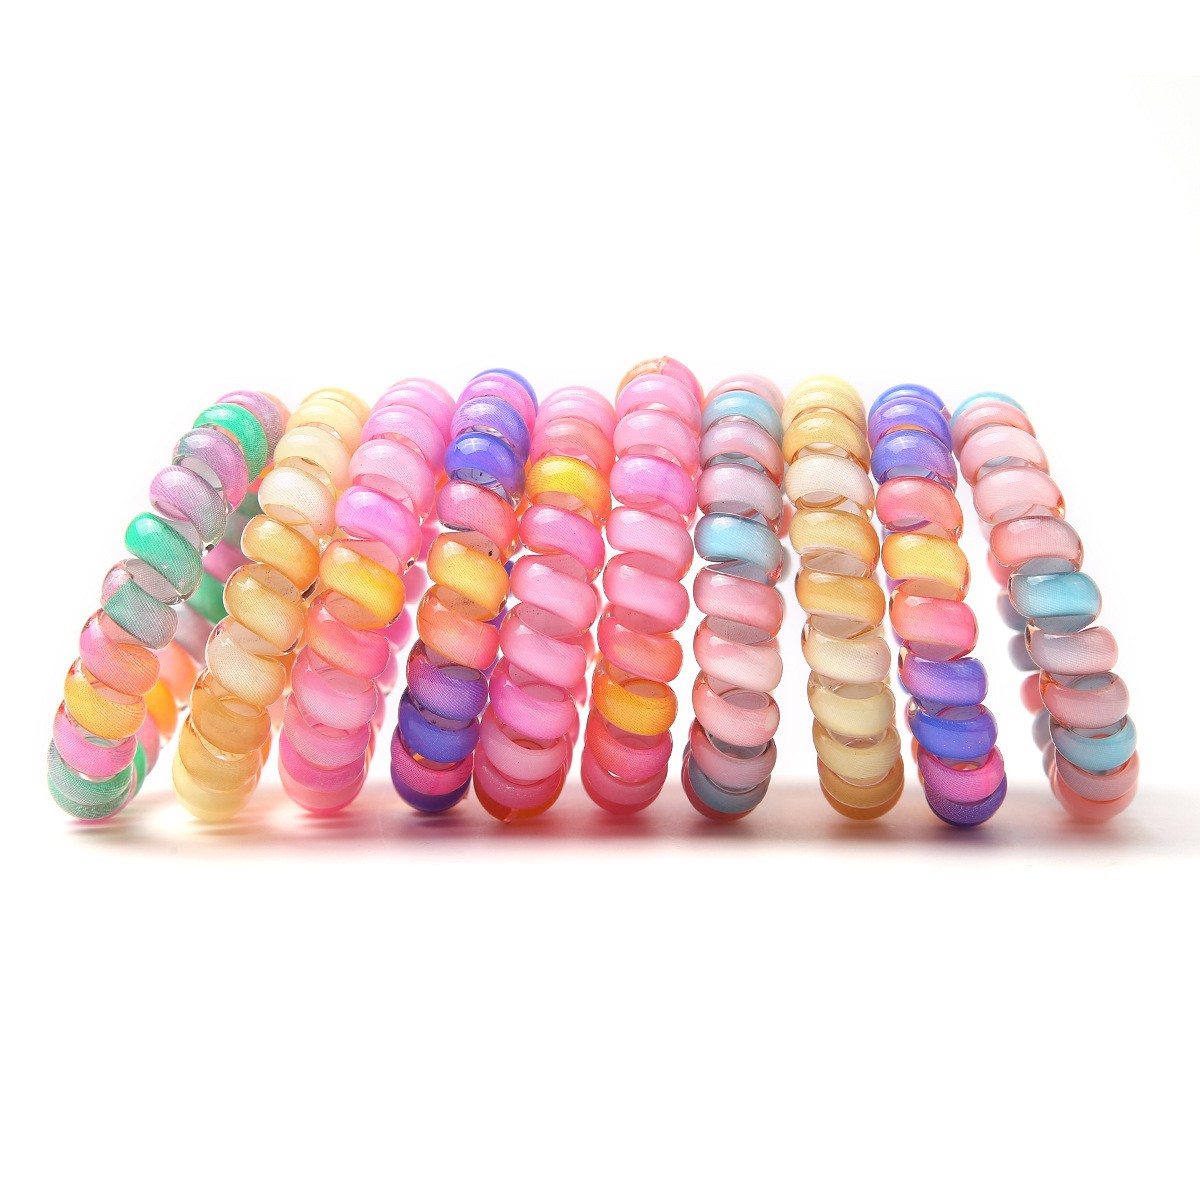 Scrunchies Hair Tie 10Pcs/Bag Telephone Line Hair Ties Macron Color Elastic Hairband Pony Tails Hair Accessories ONLY FOR USA